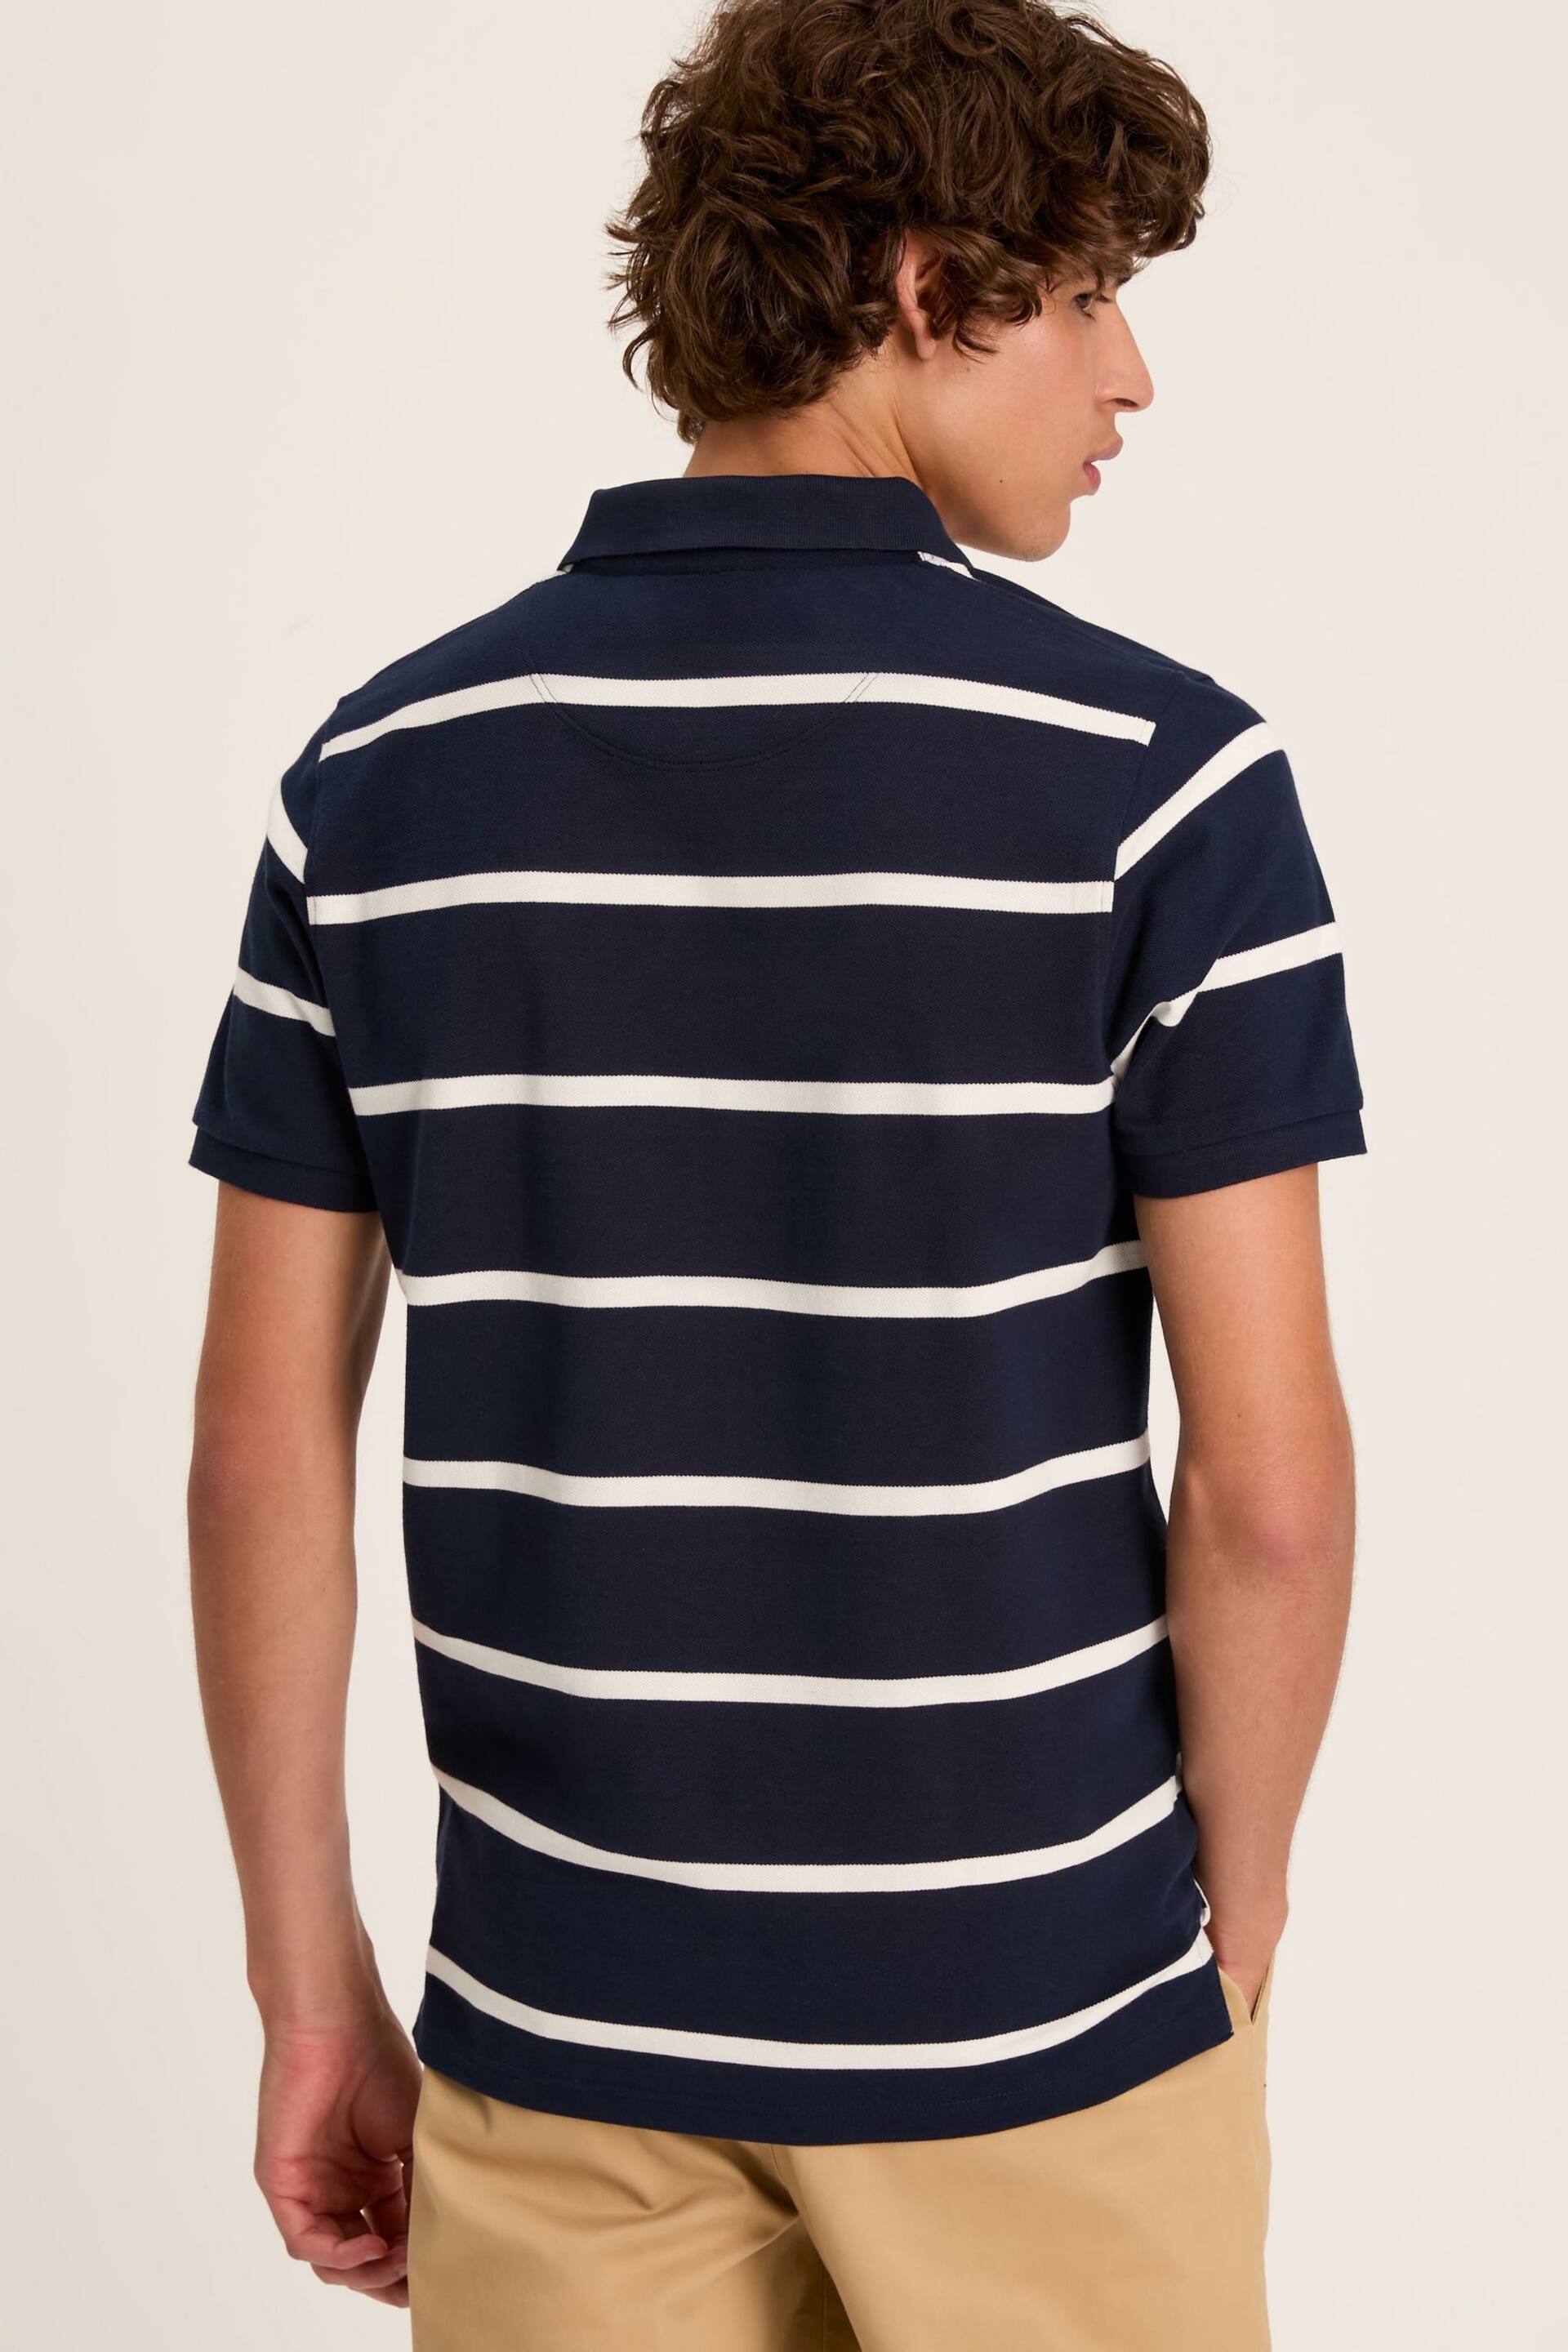 Joules Filbert Navy/White Slim Fit Striped Polo Shirt - Image 3 of 8